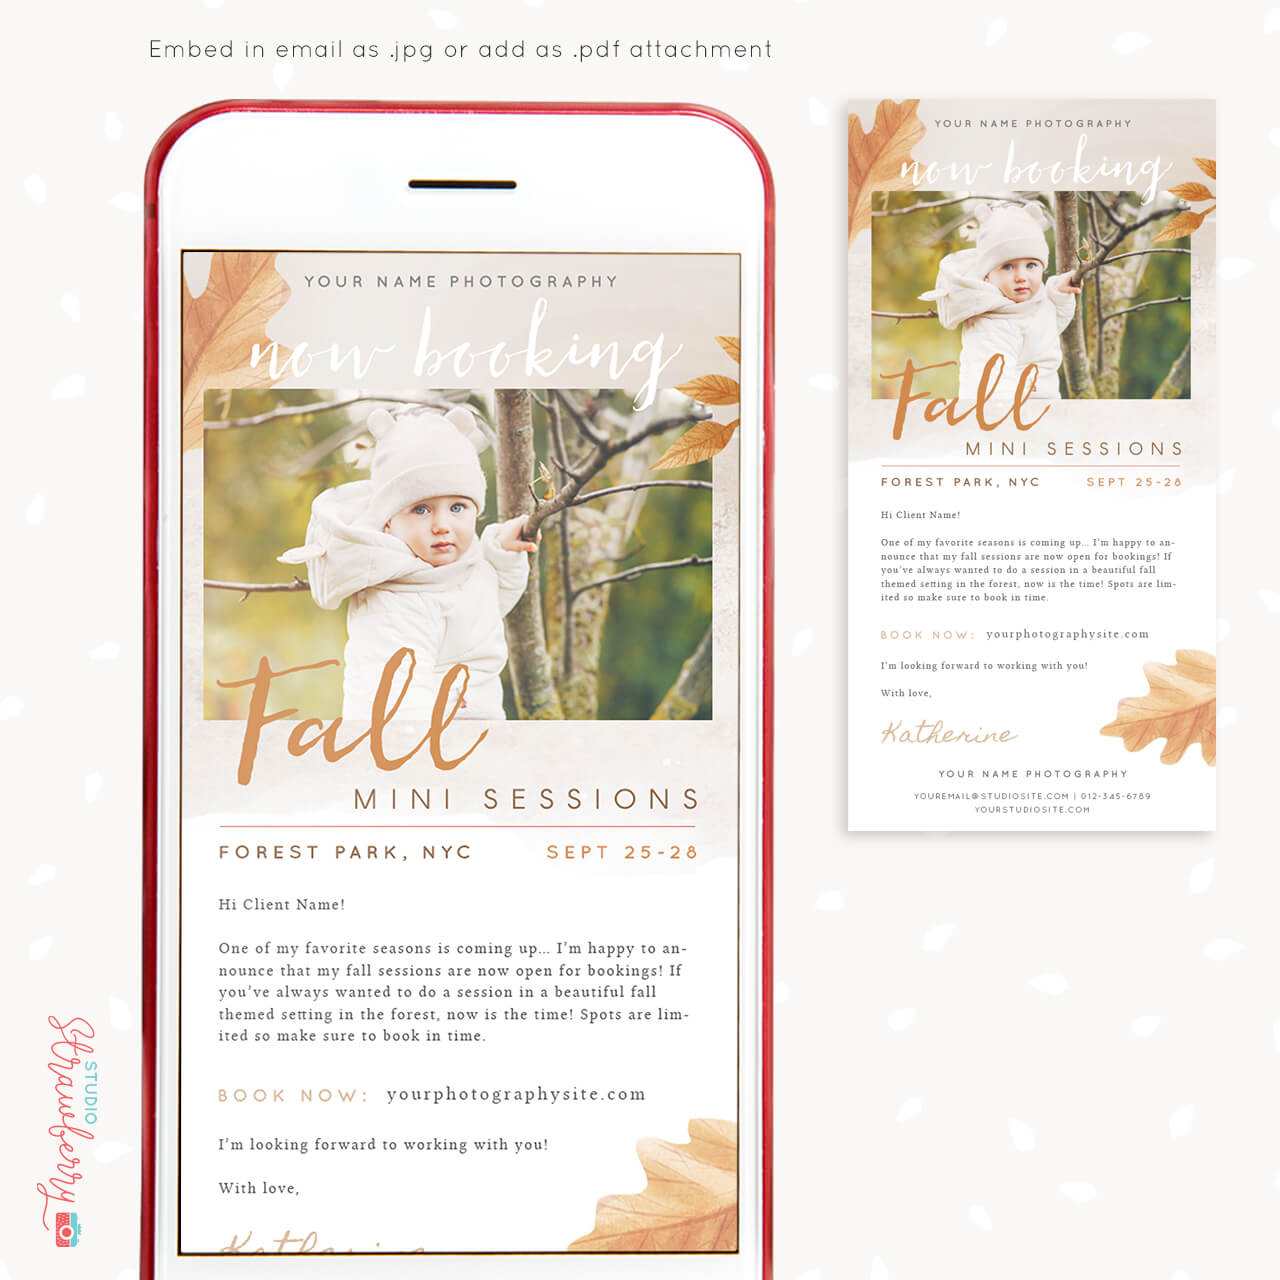 Fall mini sessions email newsletter template